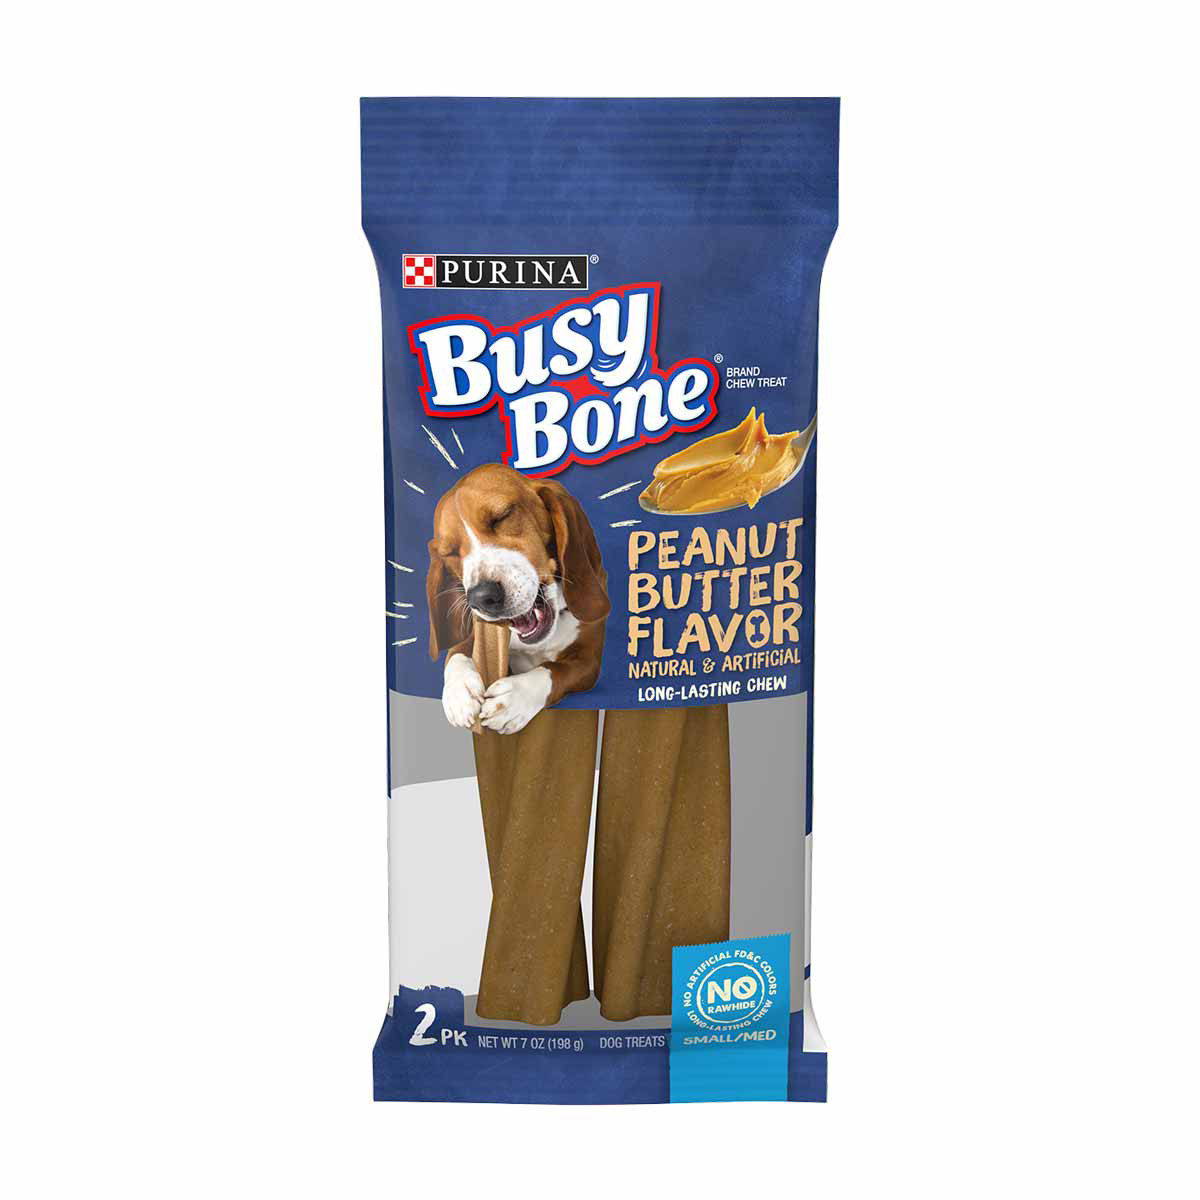 Purina Busy Bone Long Lasting Dog Treats, Peanut Butter Flavor, 2 Count